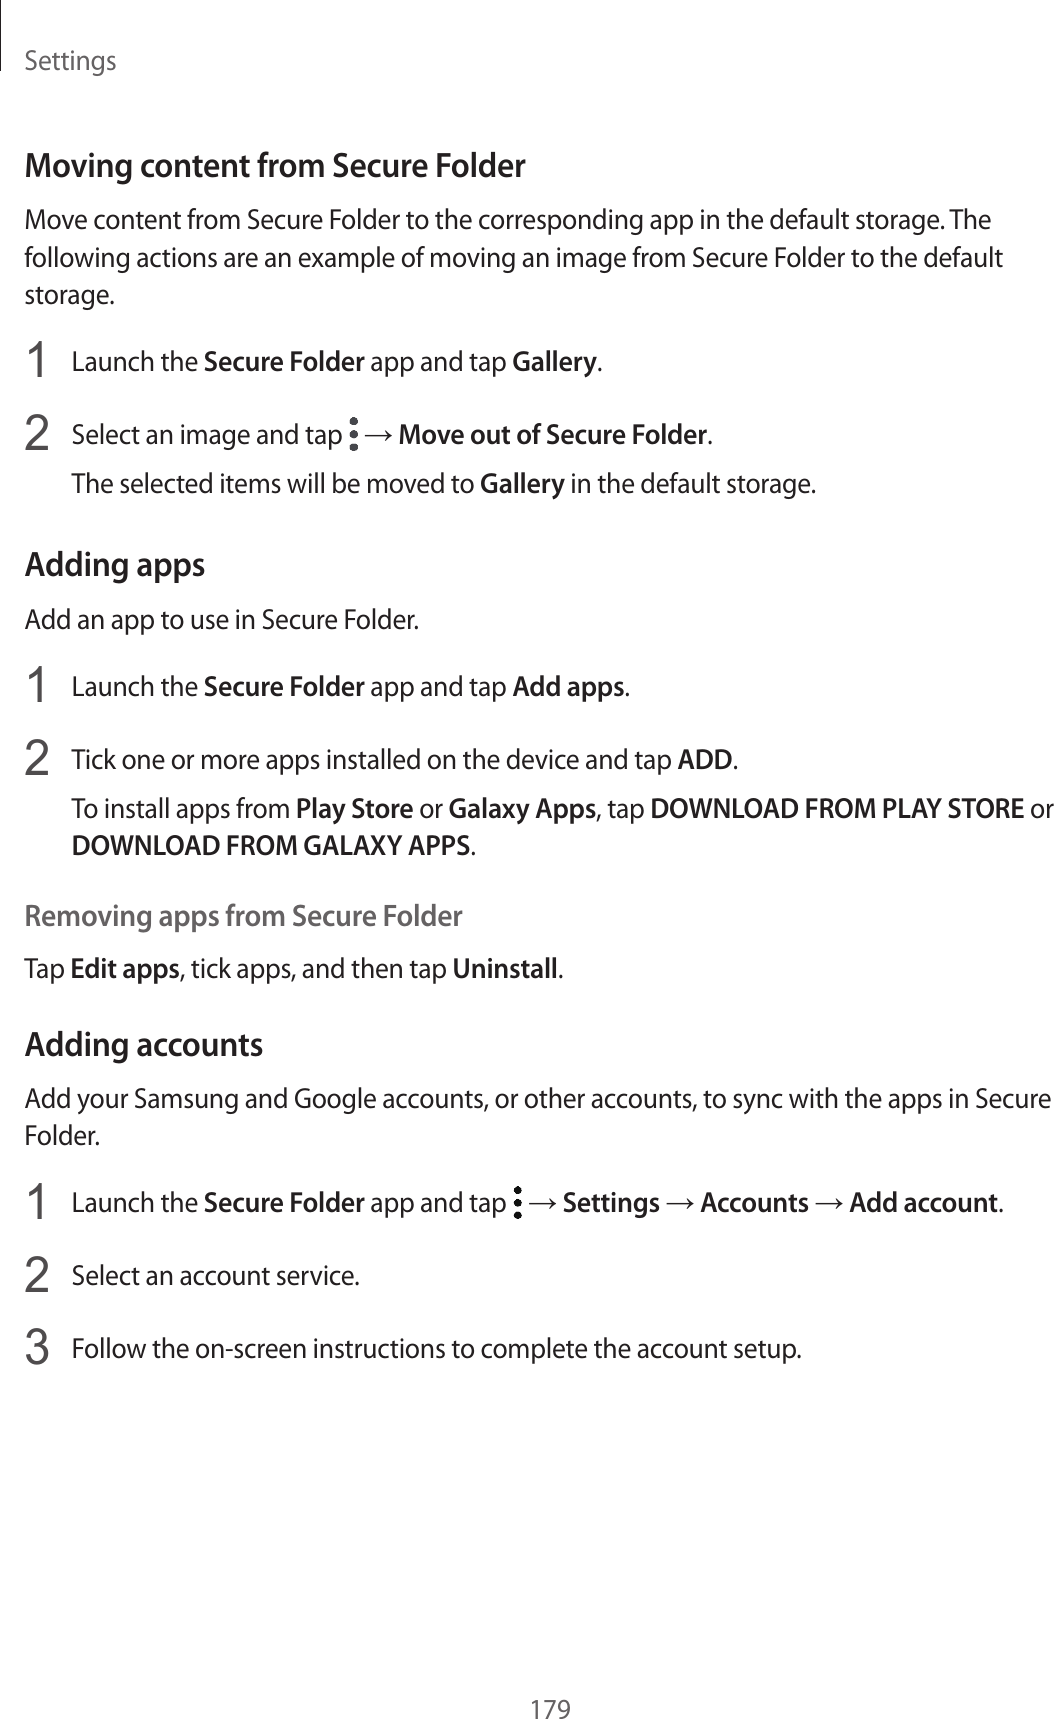 Settings179Moving content from Secure FolderMove content from Secure Folder to the corresponding app in the default storage. The following actions are an example of moving an image from Secure Folder to the default storage.1  Launch the Secure Folder app and tap Gallery.2  Select an image and tap   → Move out of Secure Folder.The selected items will be moved to Gallery in the default storage.Adding appsAdd an app to use in Secure Folder.1  Launch the Secure Folder app and tap Add apps.2  Tick one or more apps installed on the device and tap ADD.To install apps from Play Store or Galaxy Apps, tap DOWNLOAD FROM PLAY STORE or DOWNLOAD FROM GALAXY APPS.Removing apps from Secure FolderTap Edit apps, tick apps, and then tap Uninstall.Adding accountsAdd your Samsung and Google accounts, or other accounts, to sync with the apps in Secure Folder.1  Launch the Secure Folder app and tap   → Settings → Accounts → Add account.2  Select an account service.3  Follow the on-screen instructions to complete the account setup.